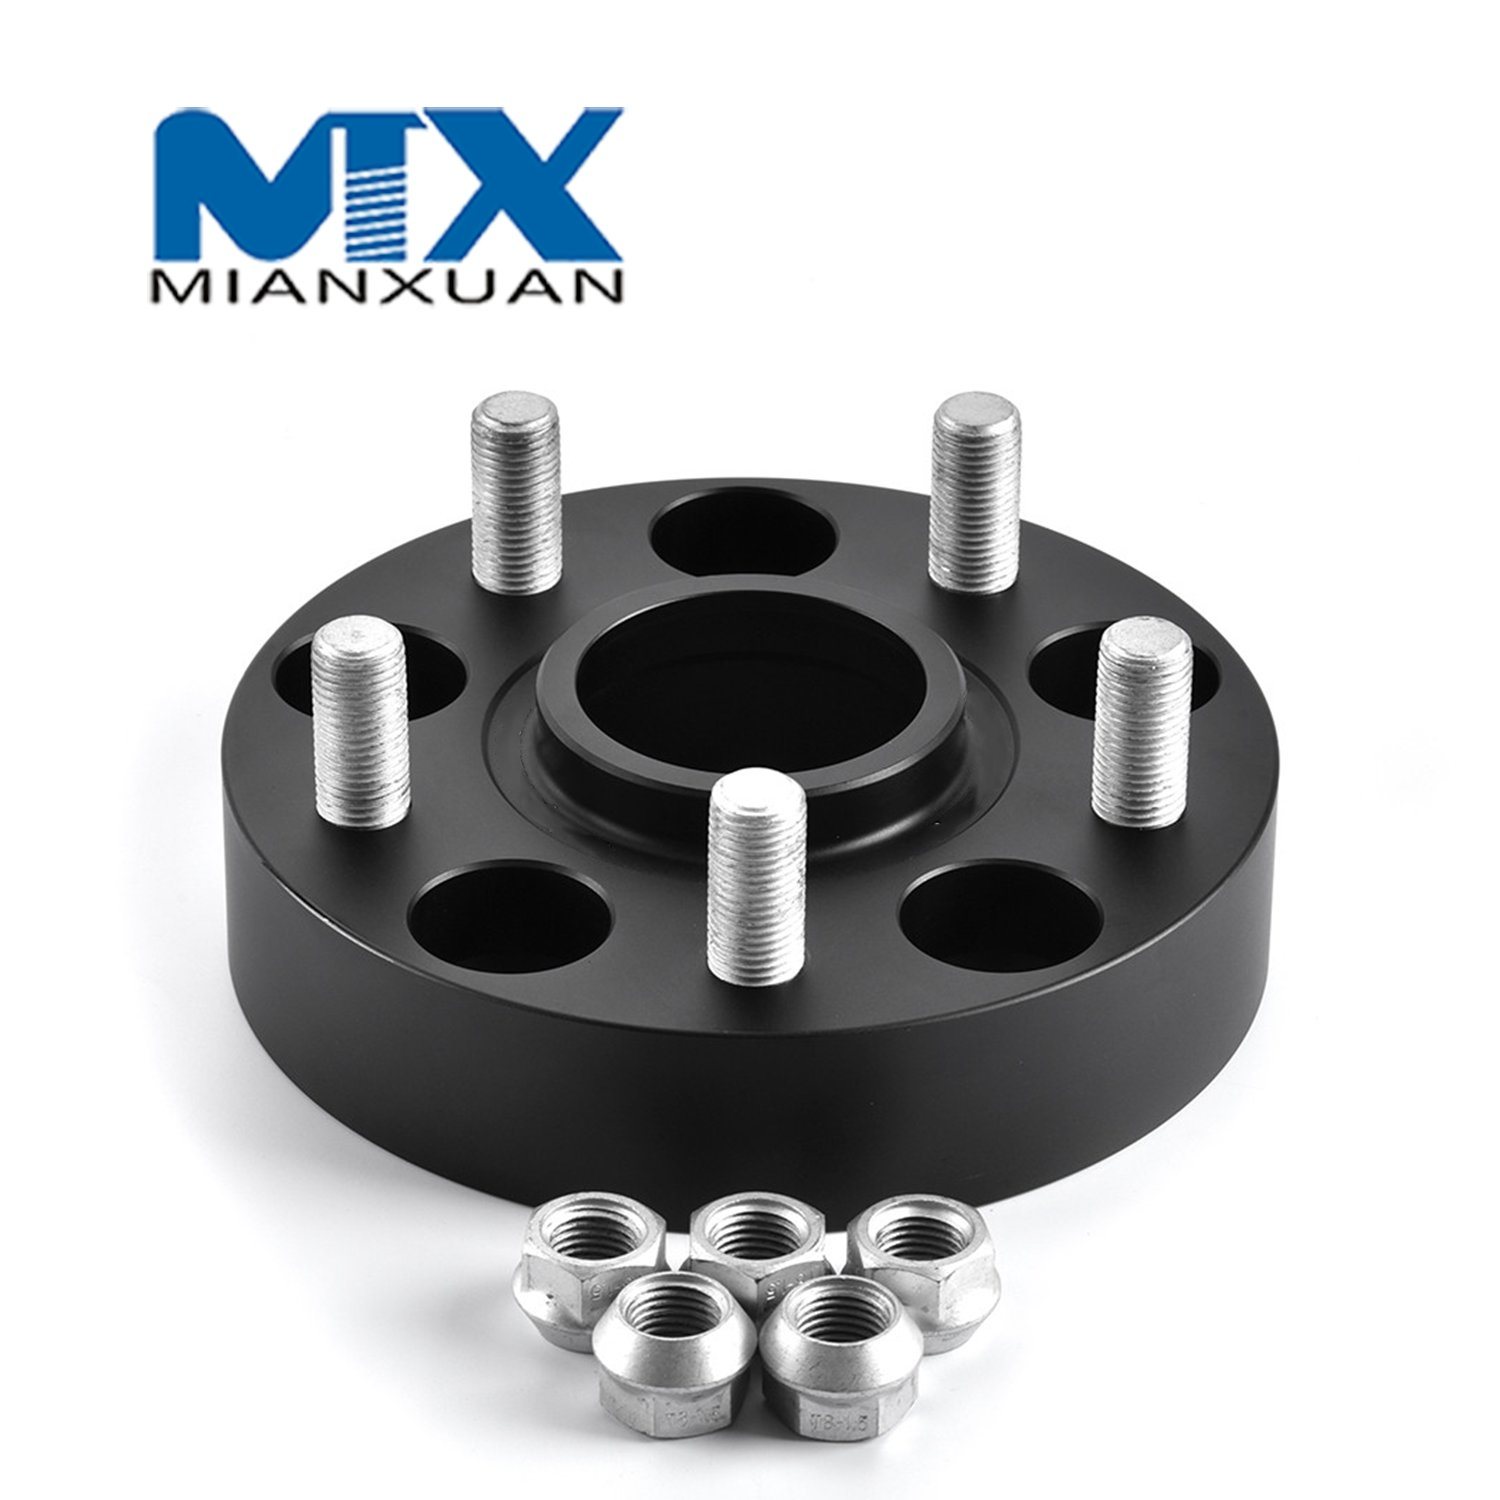 4X4 Auto Parts Width Wheel Spacer for Jeep